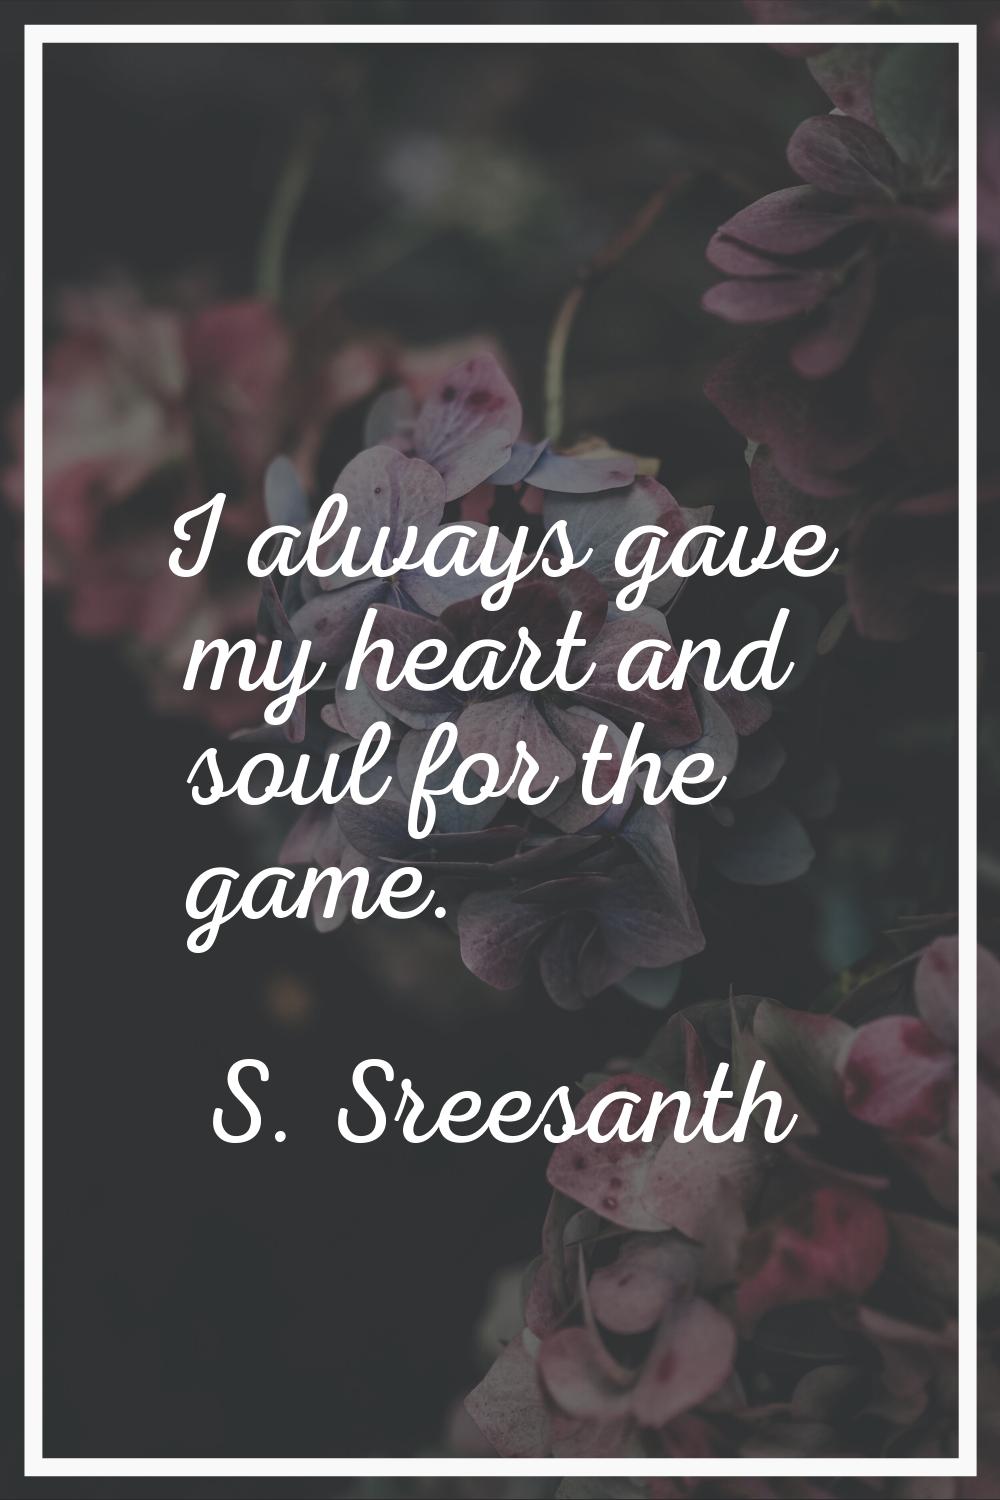 I always gave my heart and soul for the game.